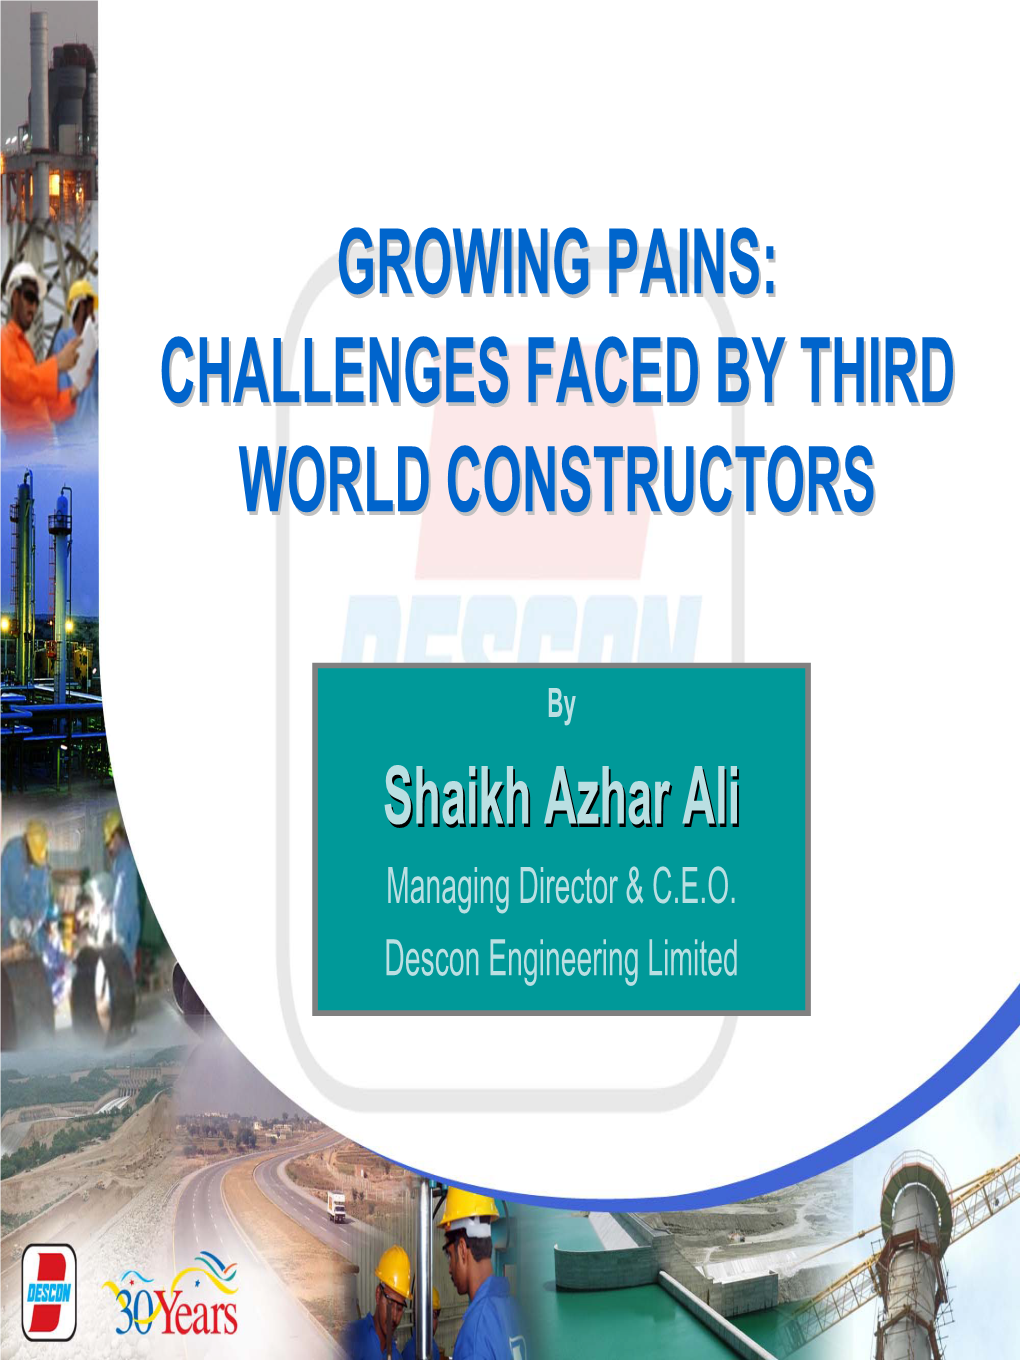 Challenges Faced by Third World Constructors